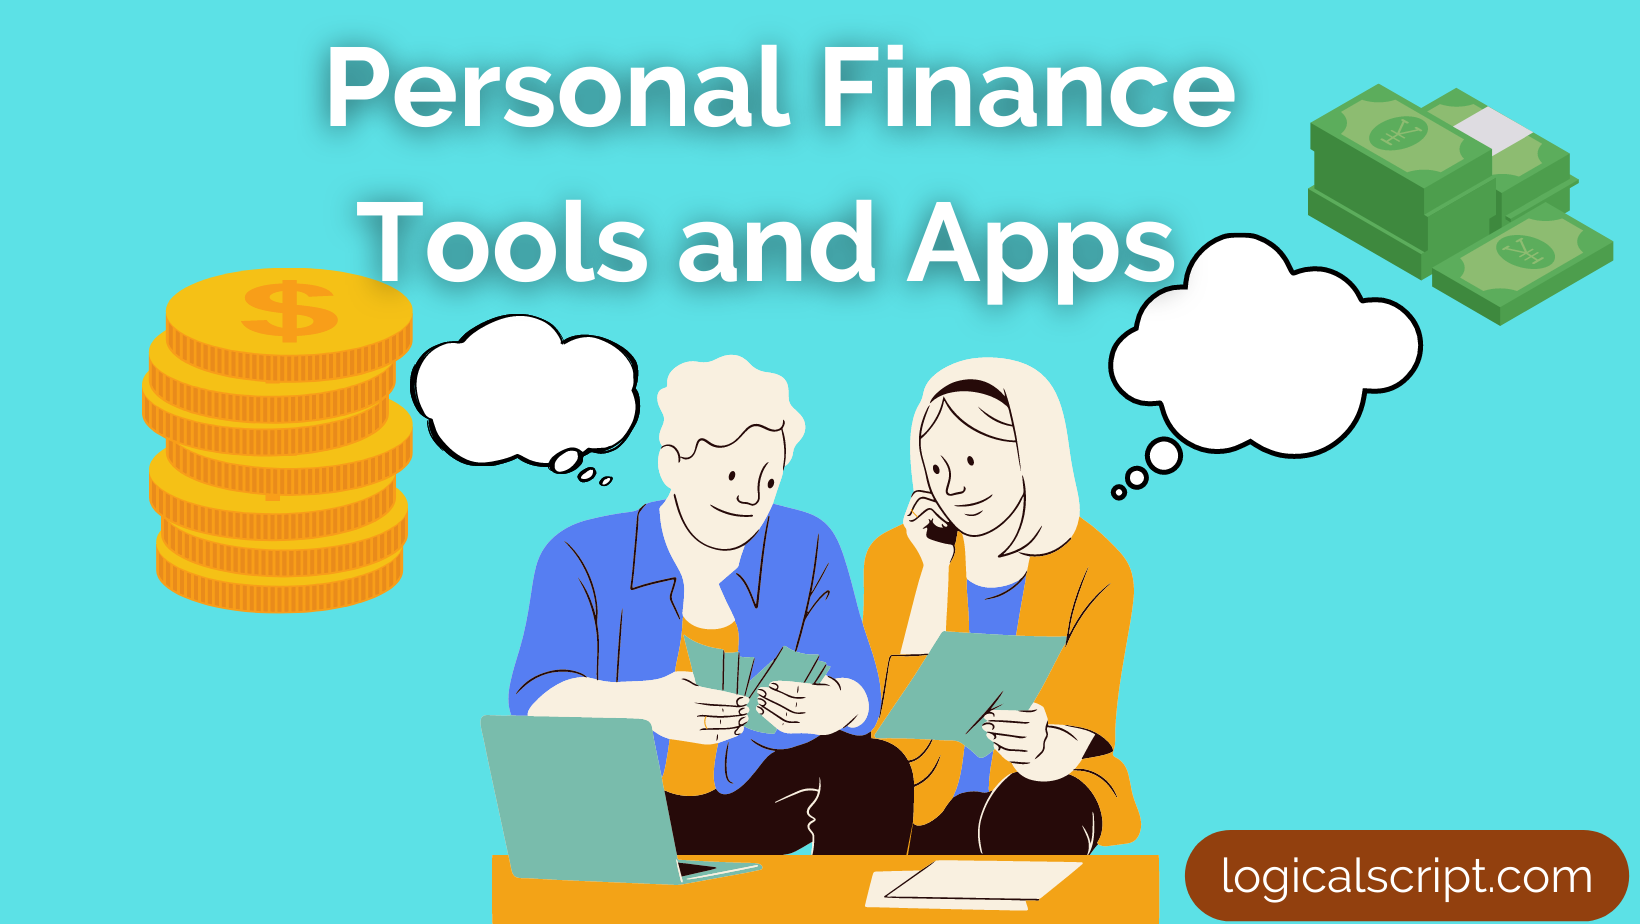 Personal Finance Tools and Apps That Improve Your Financial Planning